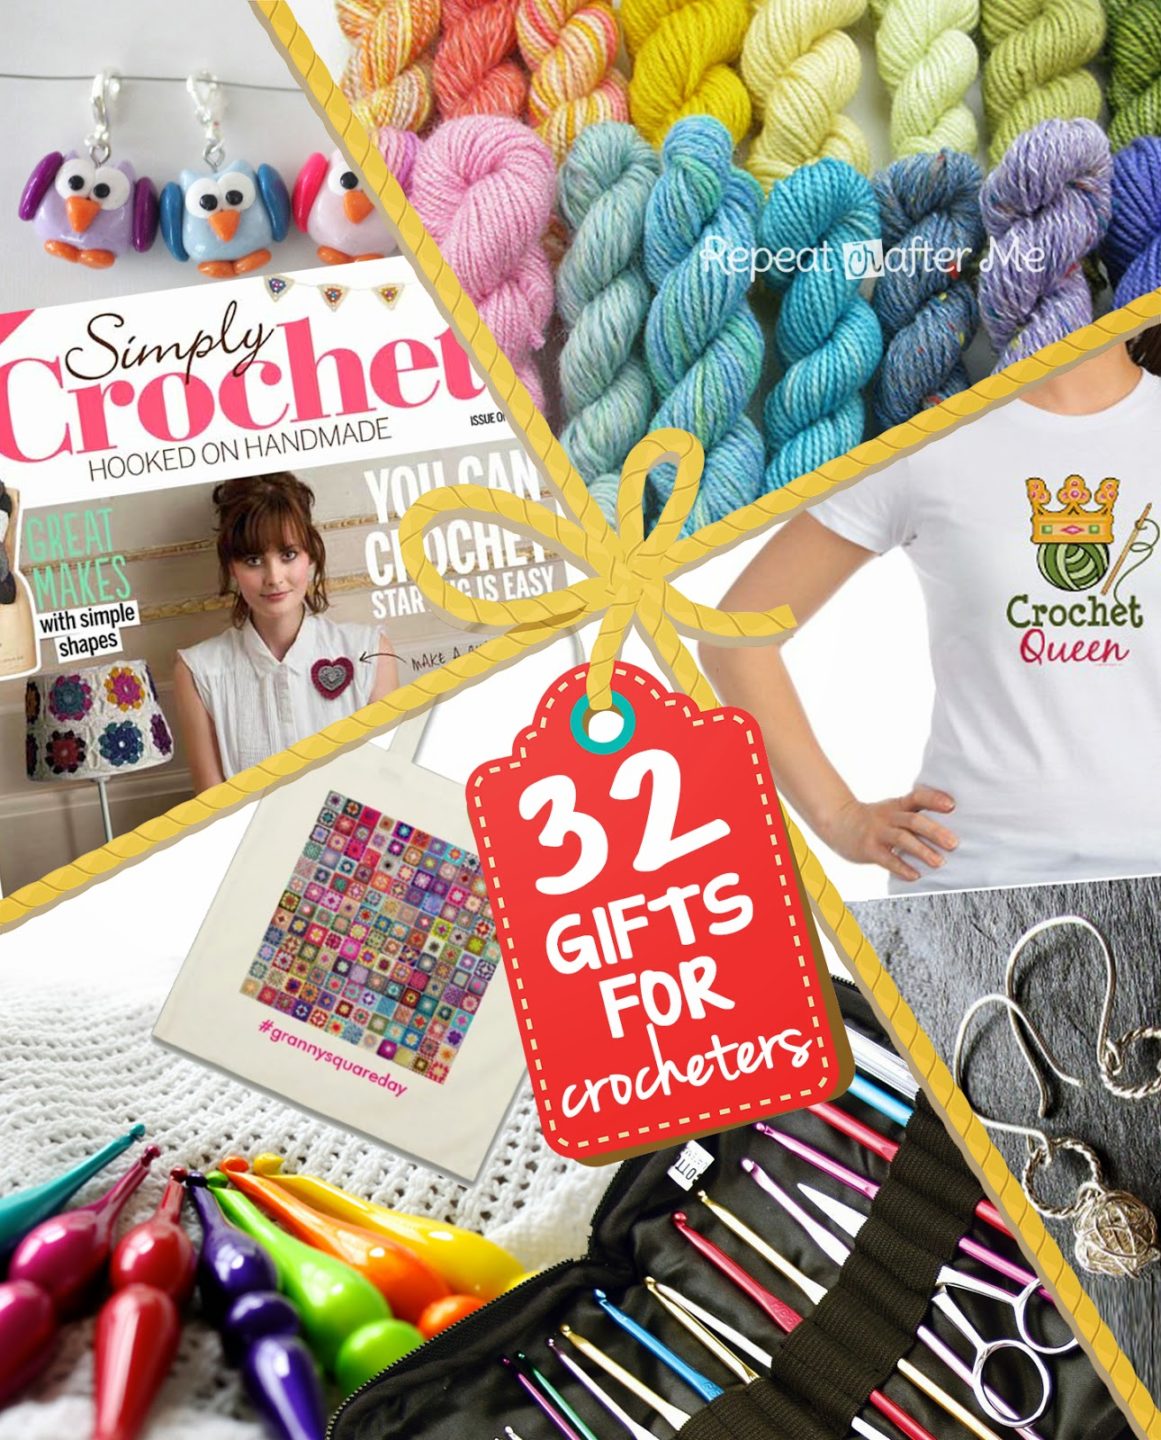 32 Gift Ideas for Crocheters - Repeat